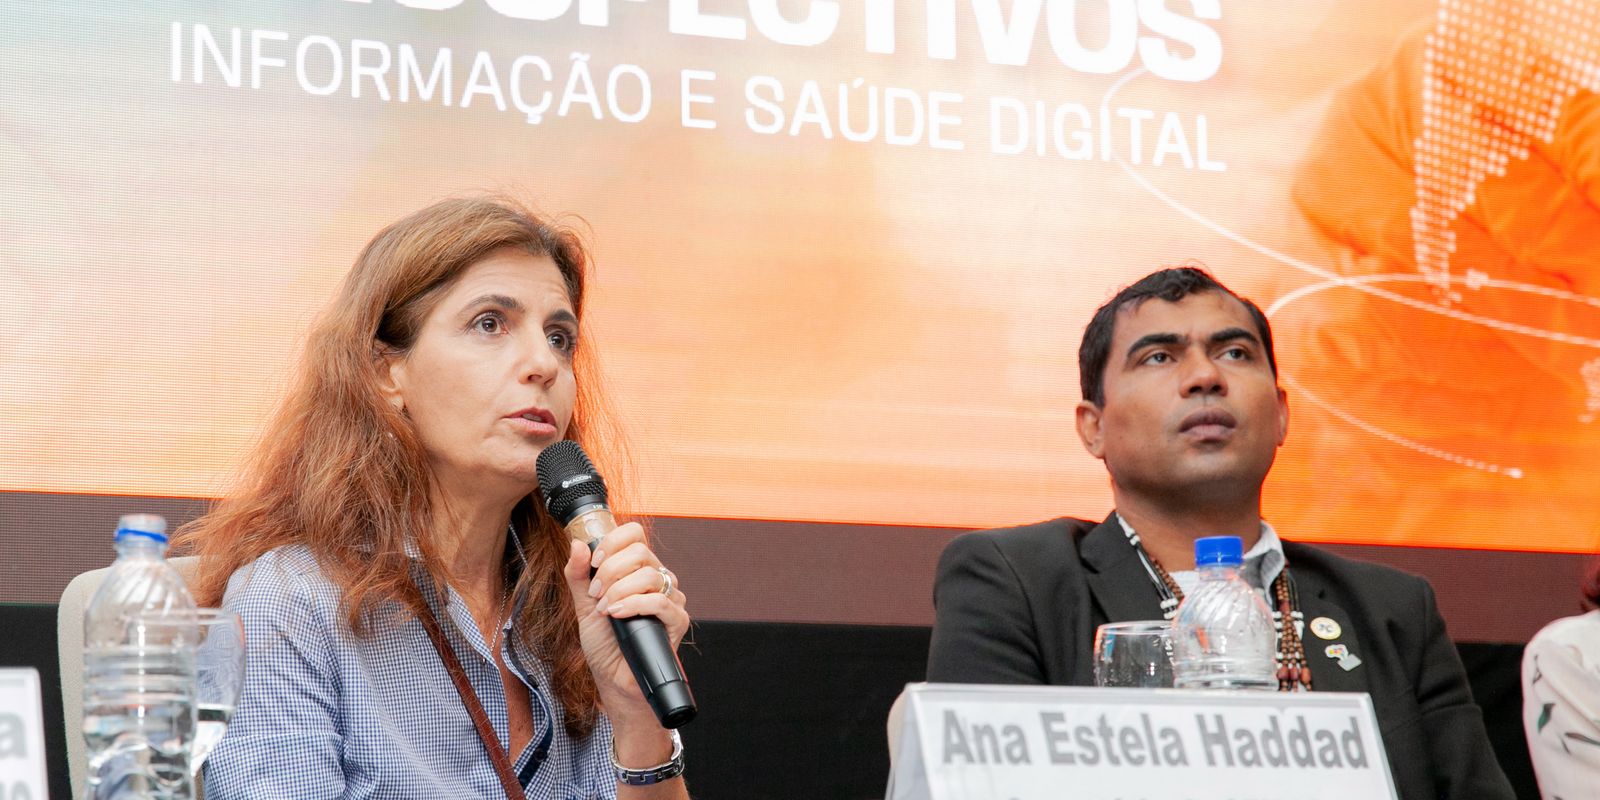 Pioneer in the Americas, Brazil wants to be a benchmark in digital health